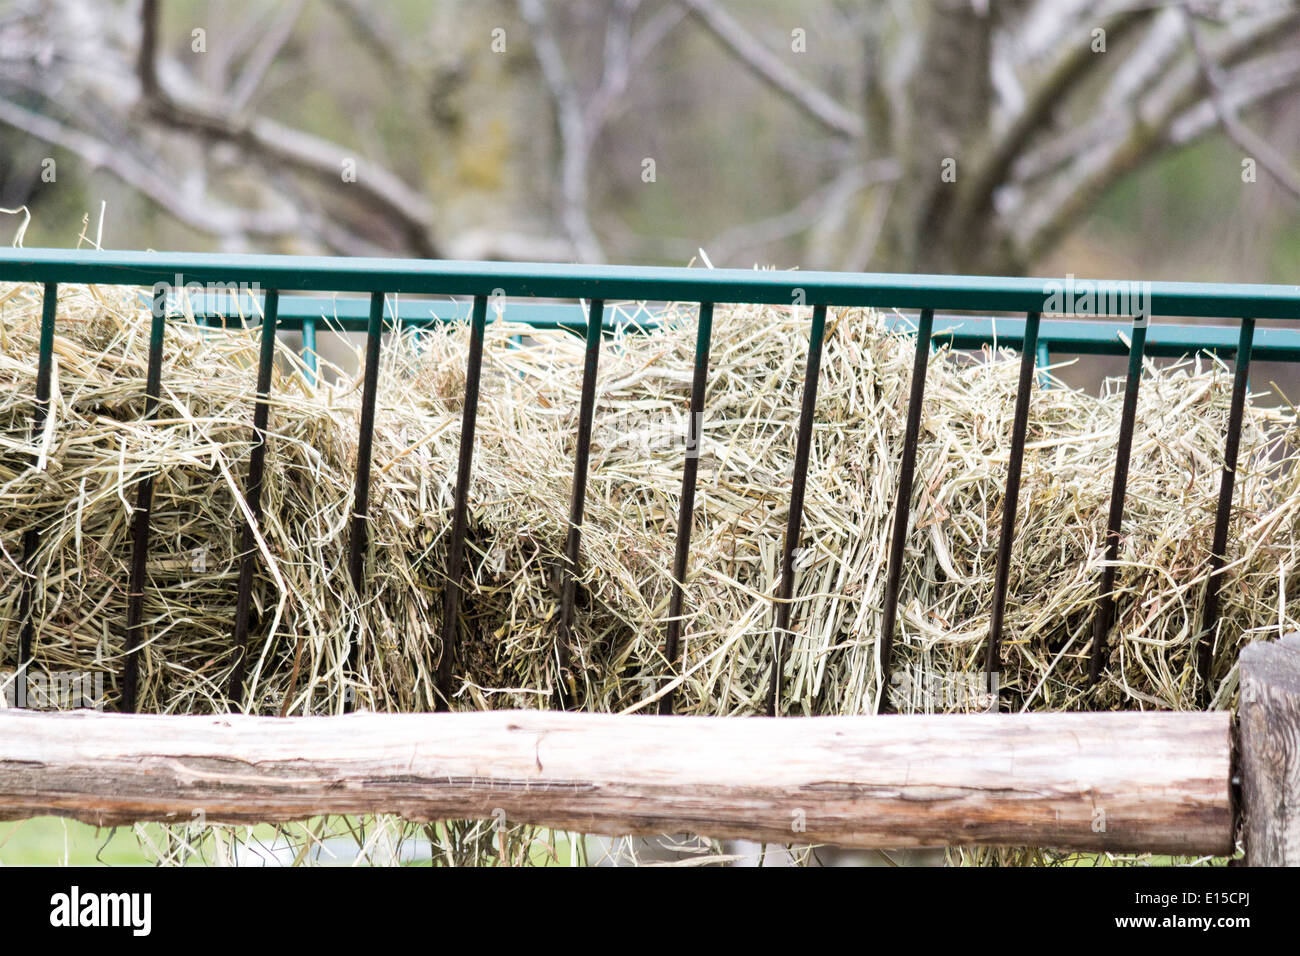 Hay in a cattle feeder Stock Photo